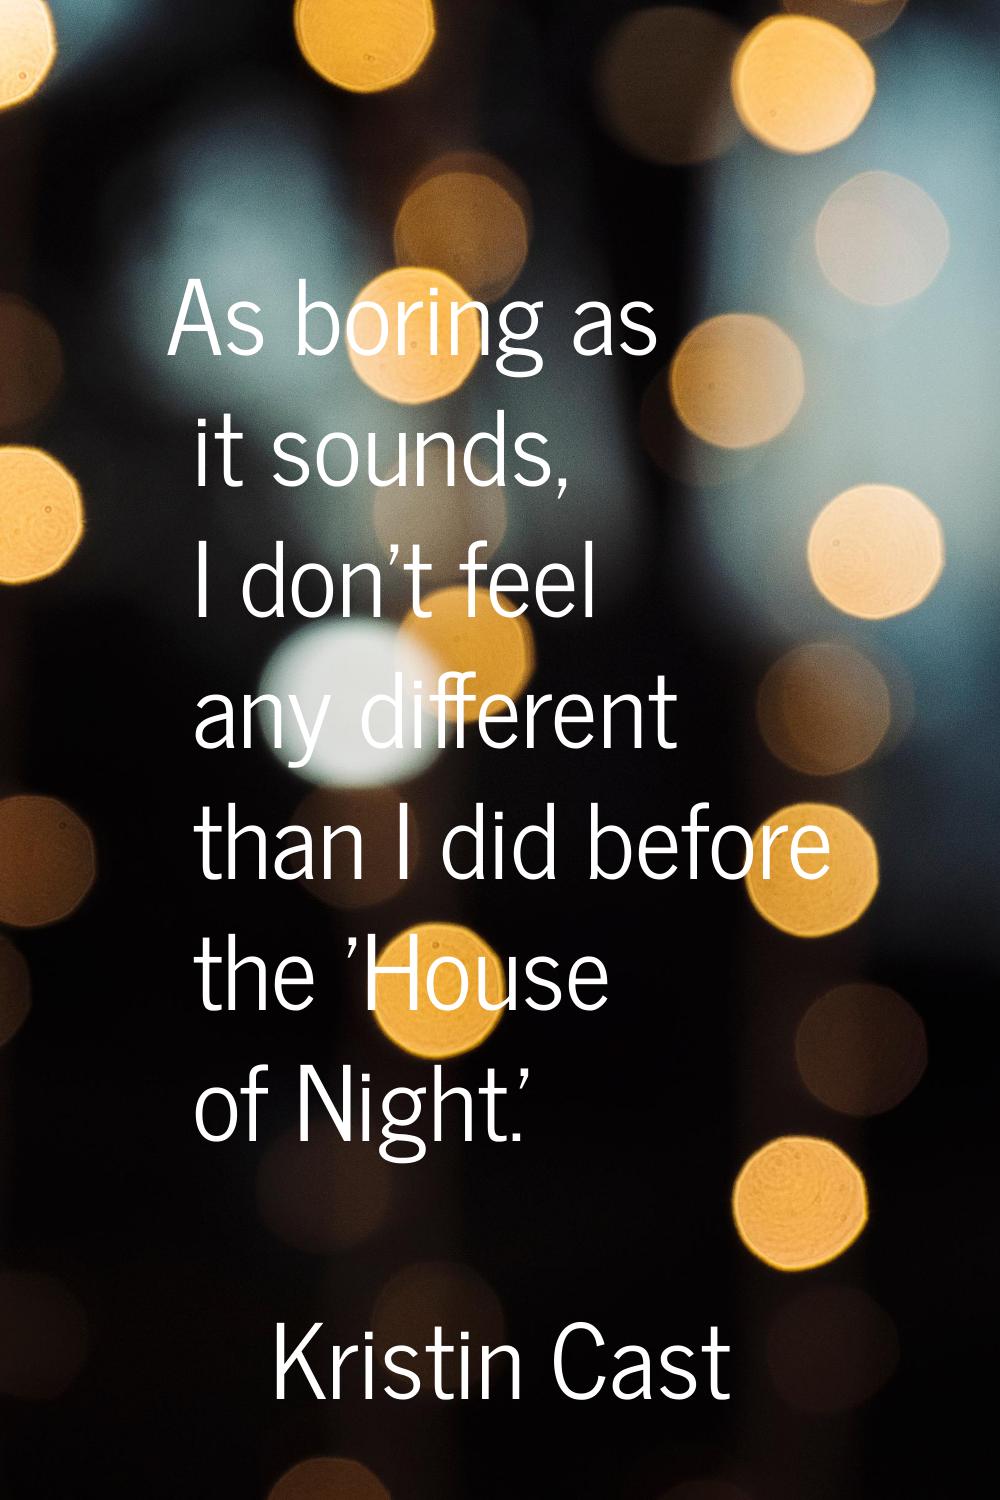 As boring as it sounds, I don't feel any different than I did before the 'House of Night.'